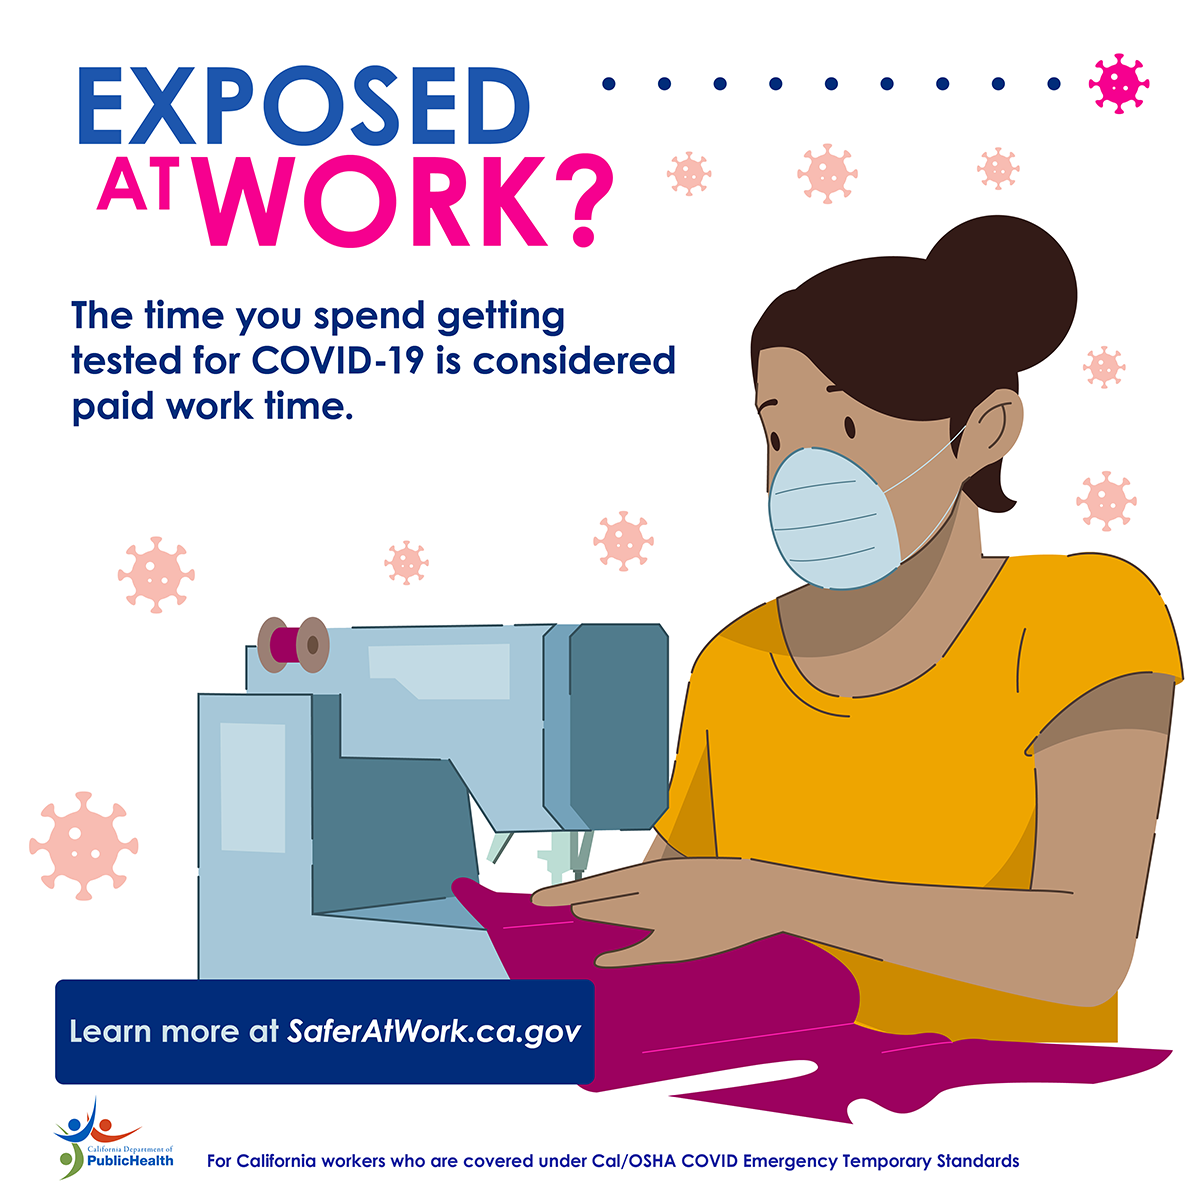 Exposed at work? The time you spend getting tested for COVID-19 is considered paid work time.